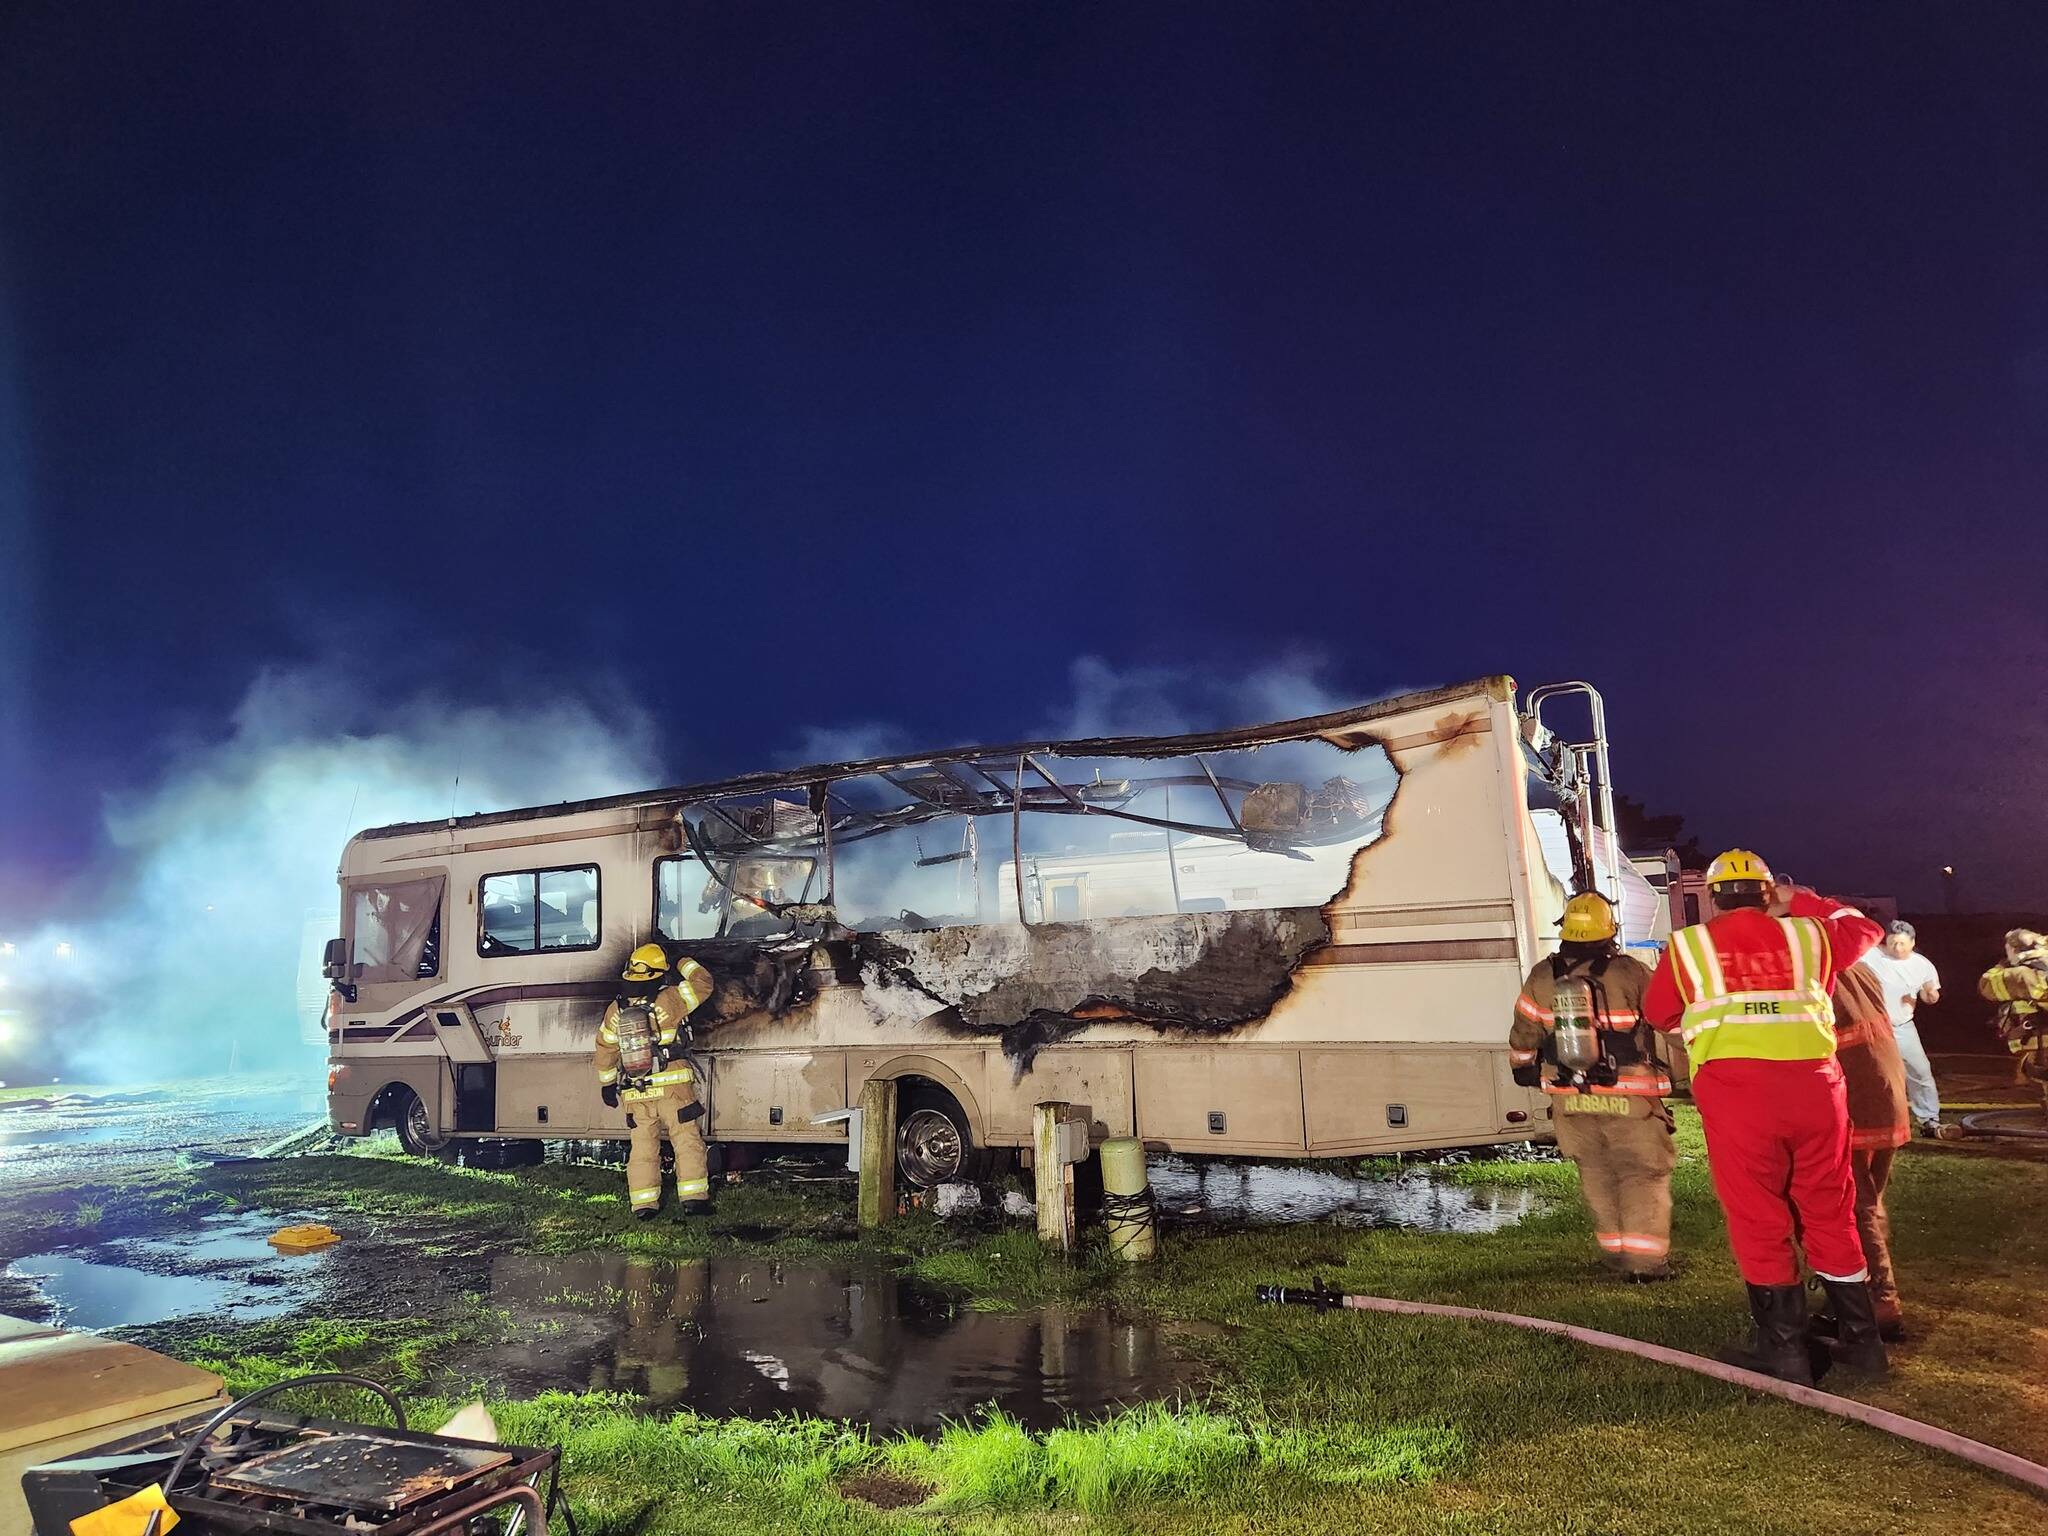 Firefighters from the South Beach Regional Fire Authority responded to an RV fire on Tuesday evening that completely gutted the vehicle. (Courtesy photo / SBRFA)